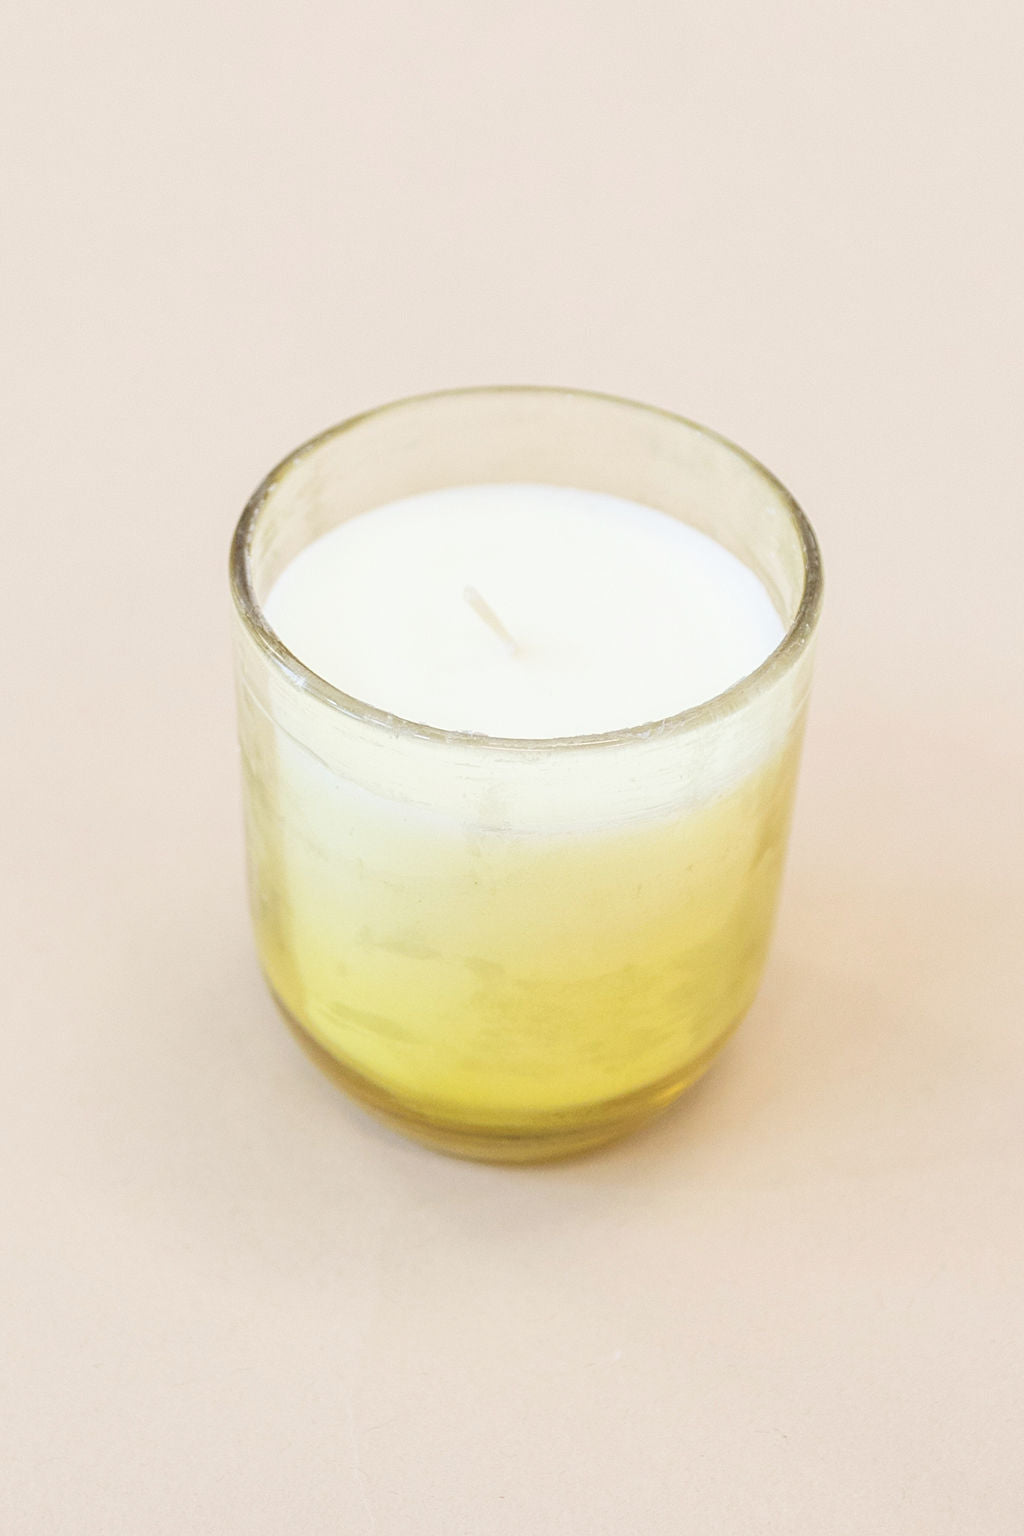 Paddywax | Enneagram Candle | The Individualist